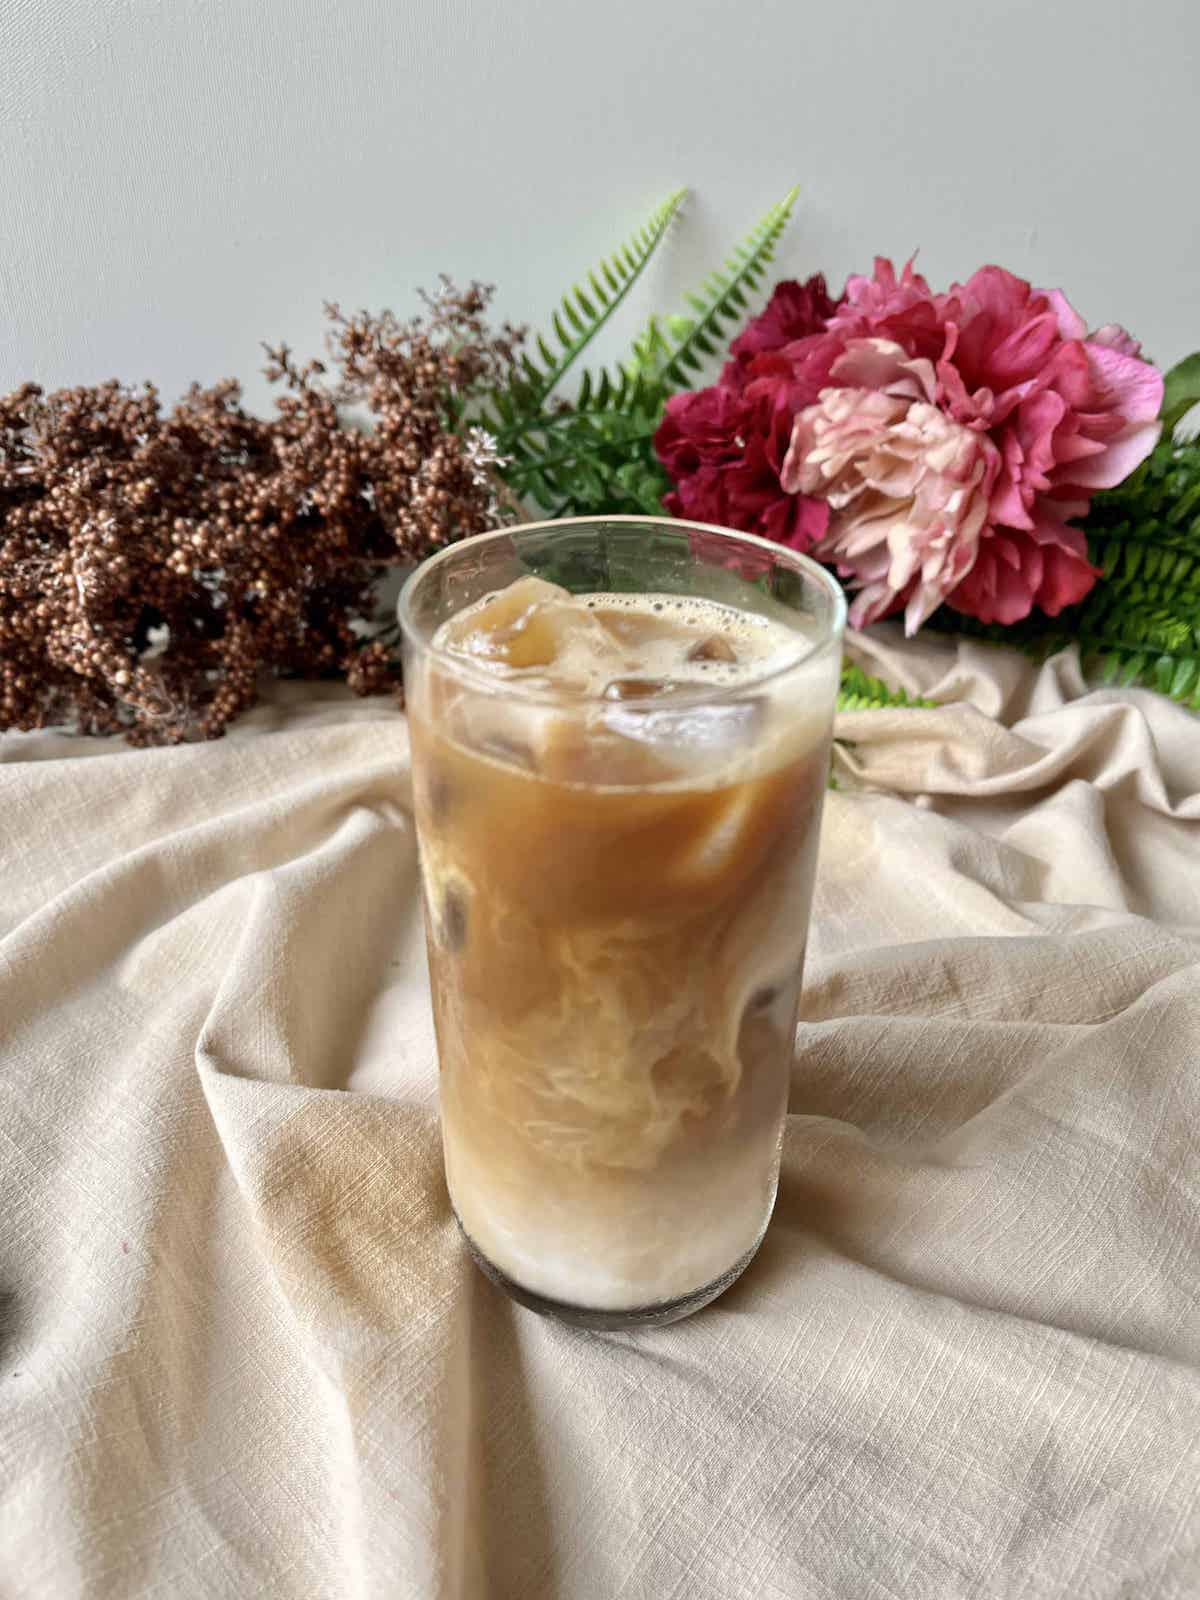 A glass of iced cold brew coffee with milk.